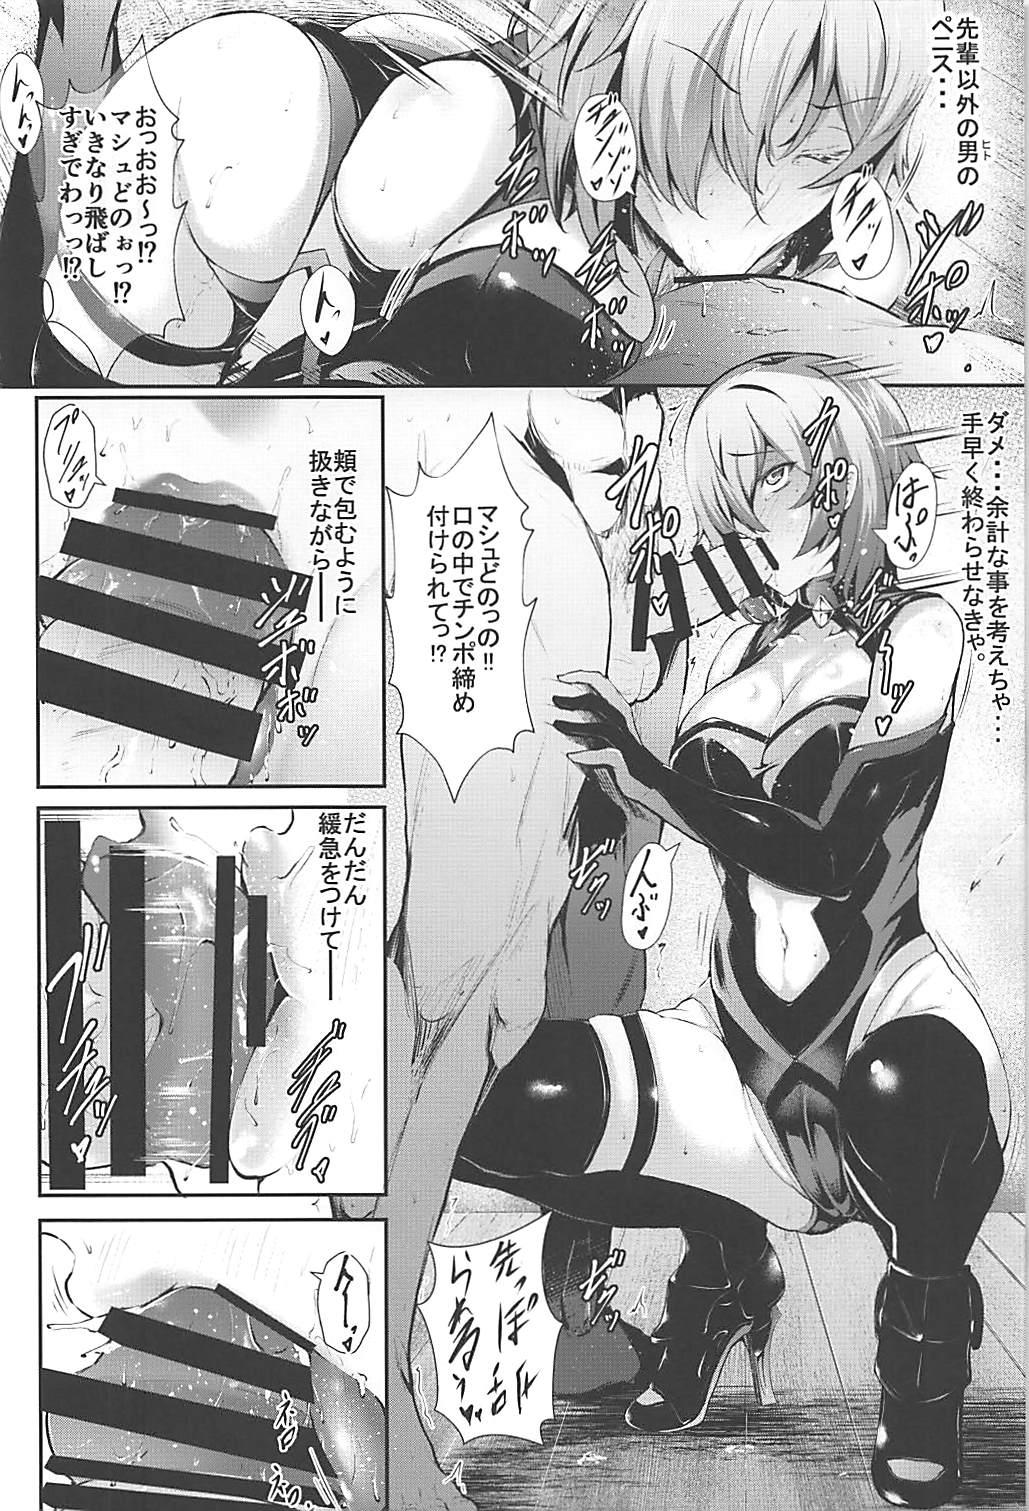 Mom Nympho-mania? - Fate grand order Girls Getting Fucked - Page 7